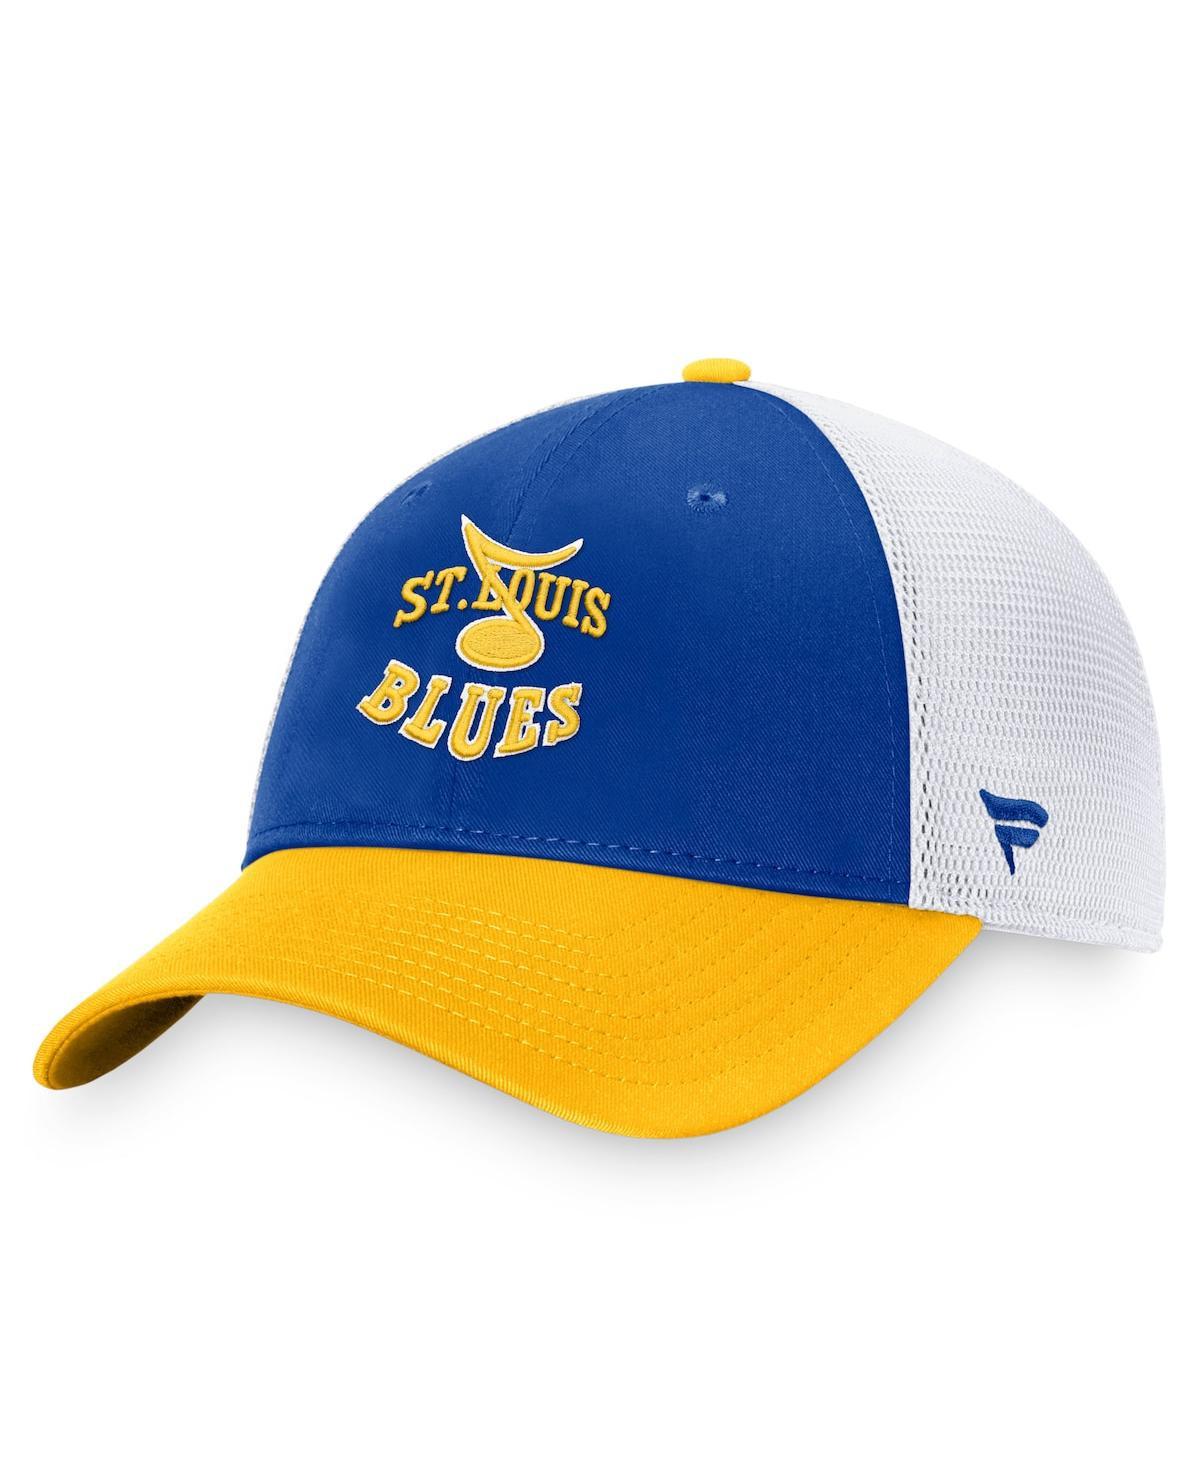 Fanatics Branded Gold/white St. Louis Blues Authentic Pro Rink